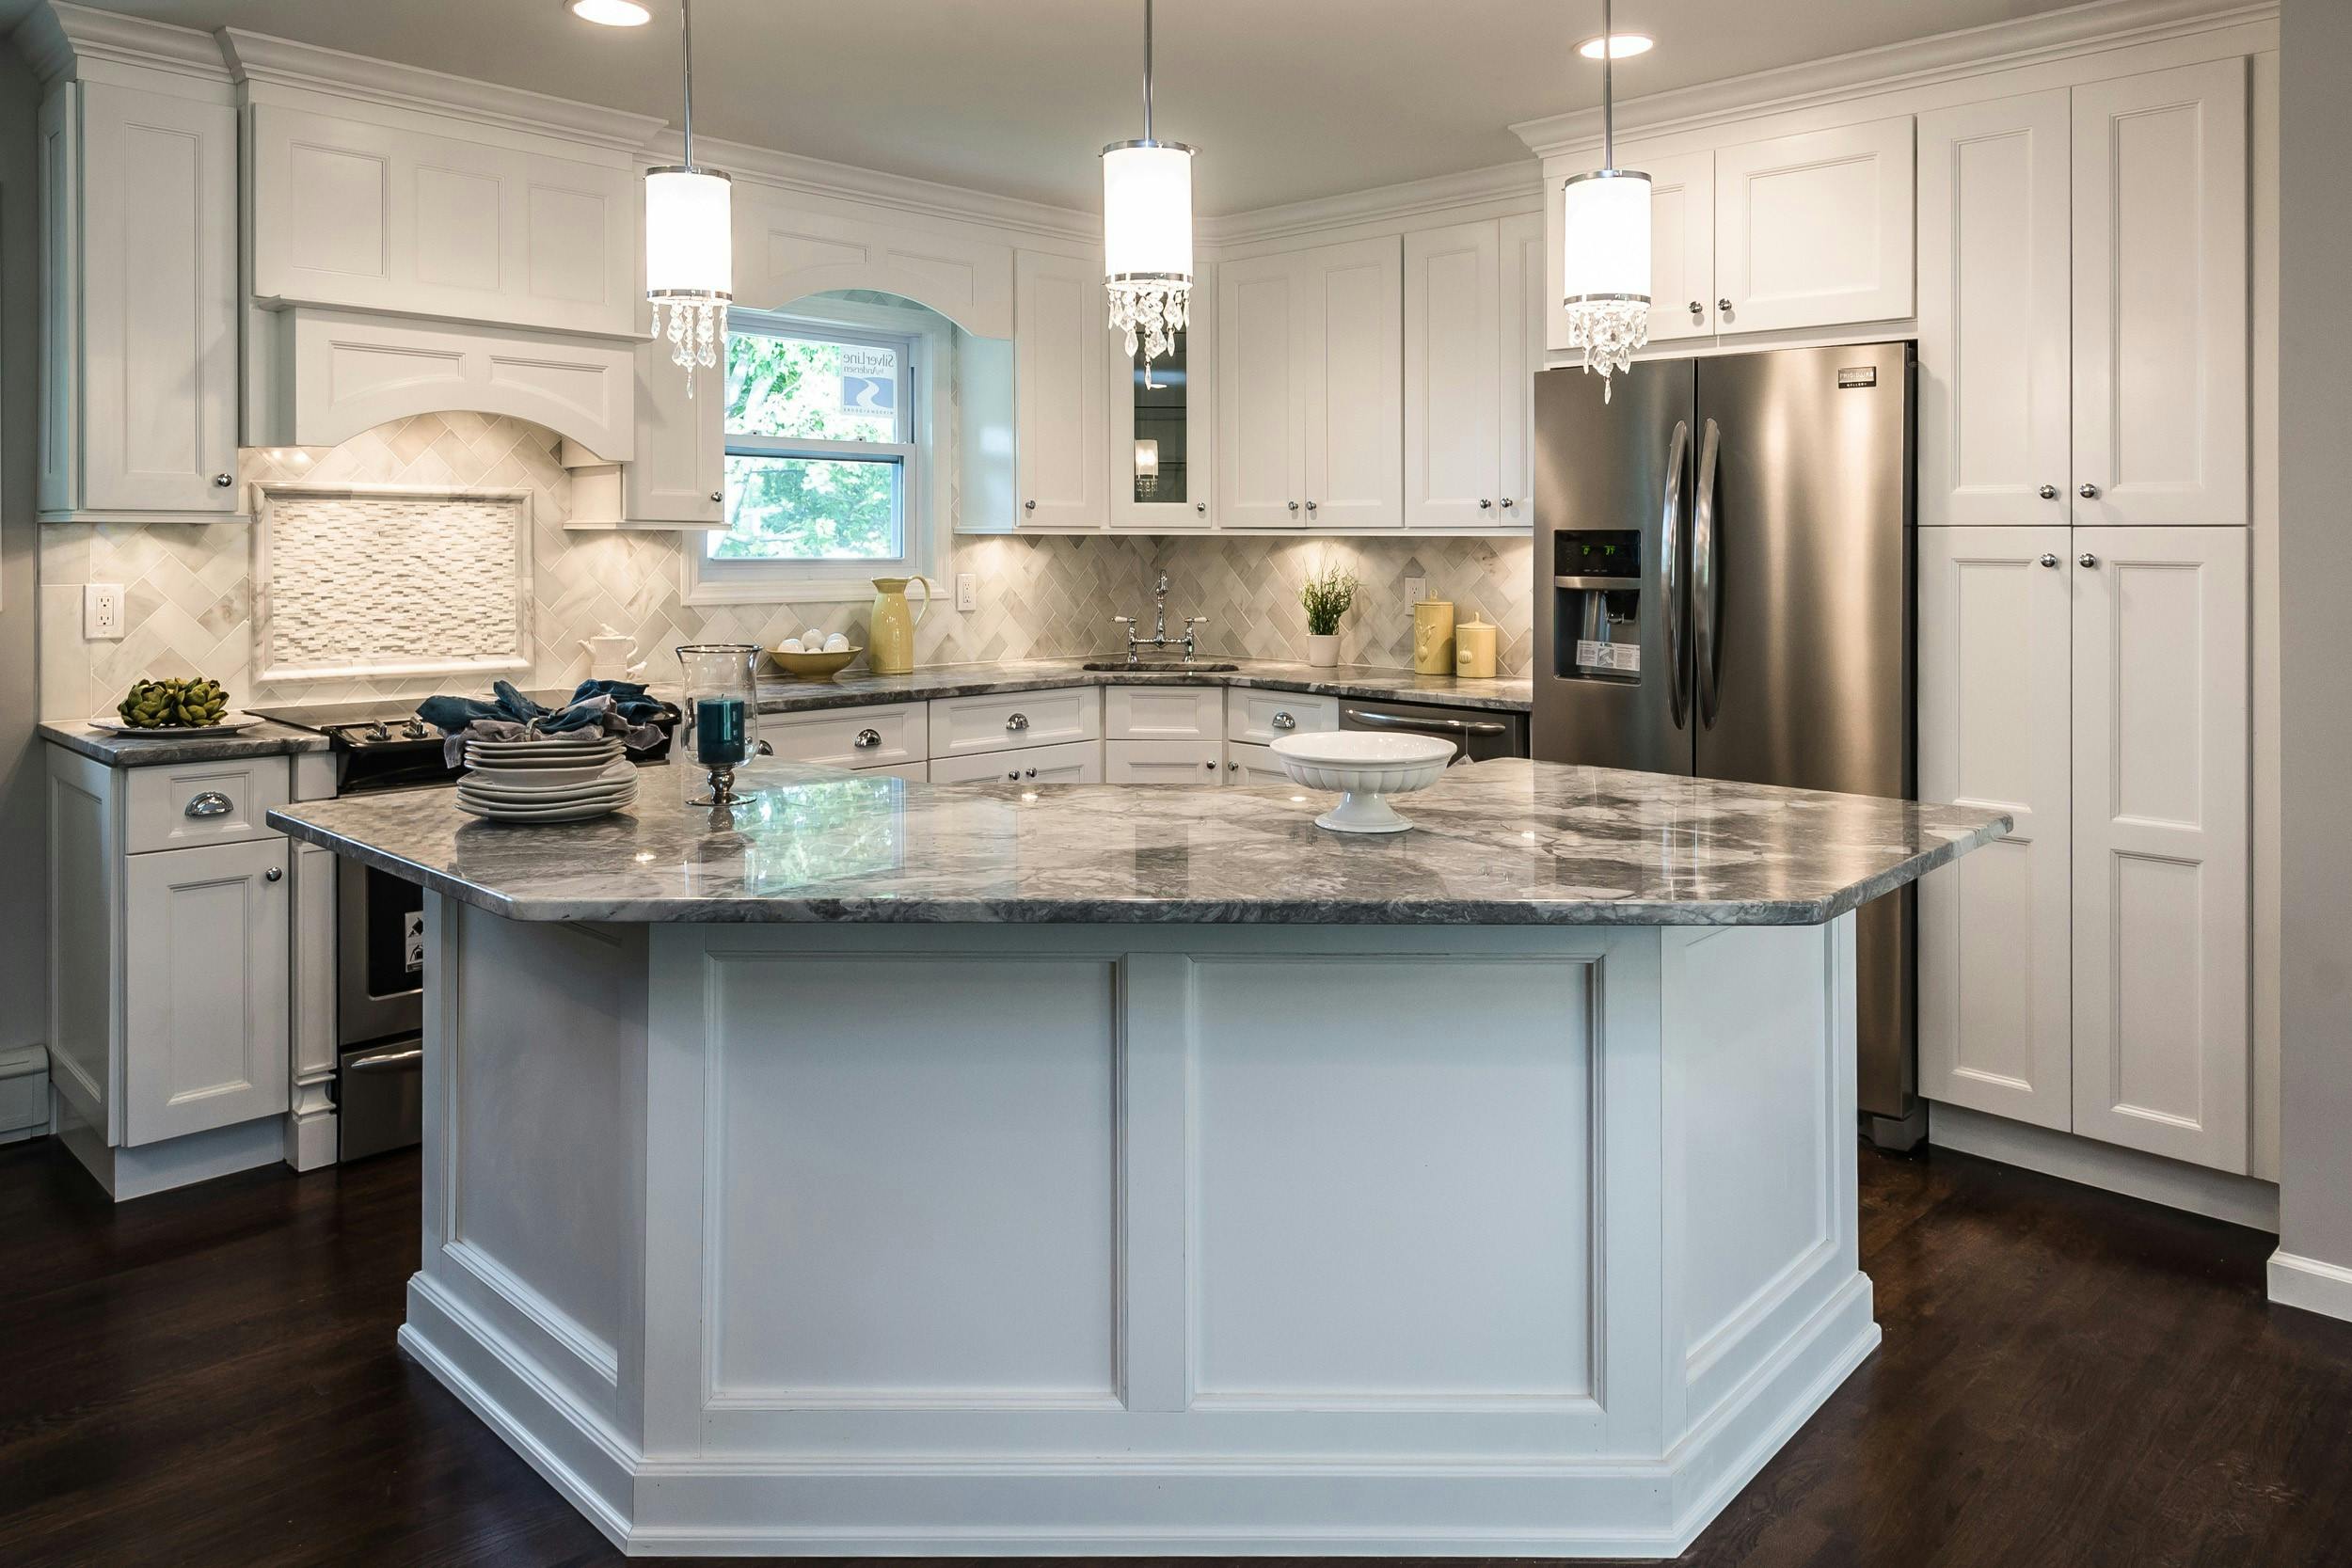 Kitchen Countertops And Cabinets, What Color Kitchen Cabinets Go With Dark Countertops